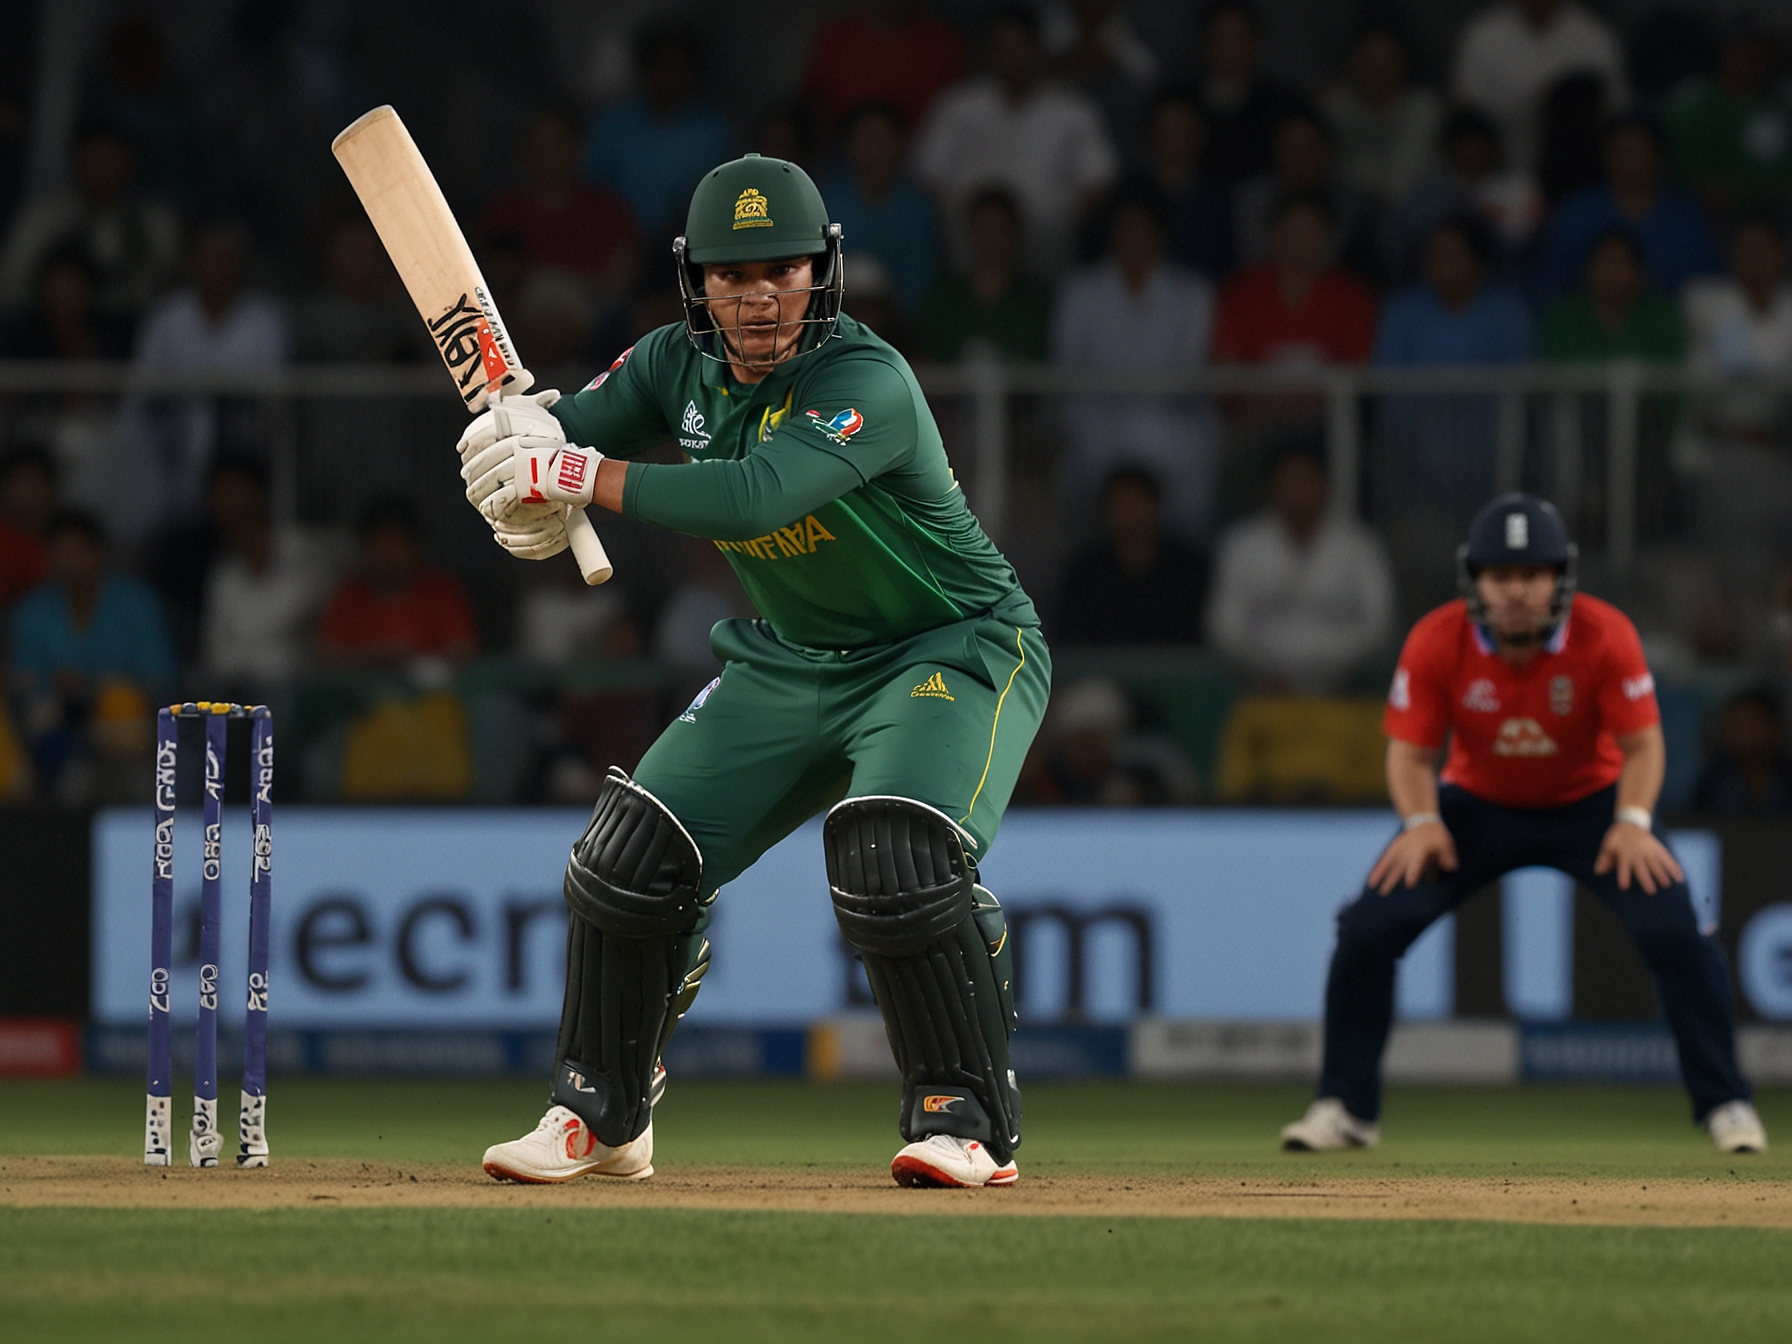 Quinton de Kock delivers a powerful shot during the T20 World Cup 2024 match against England, highlighting his exemplary batting skills that guided South Africa to a crucial win.